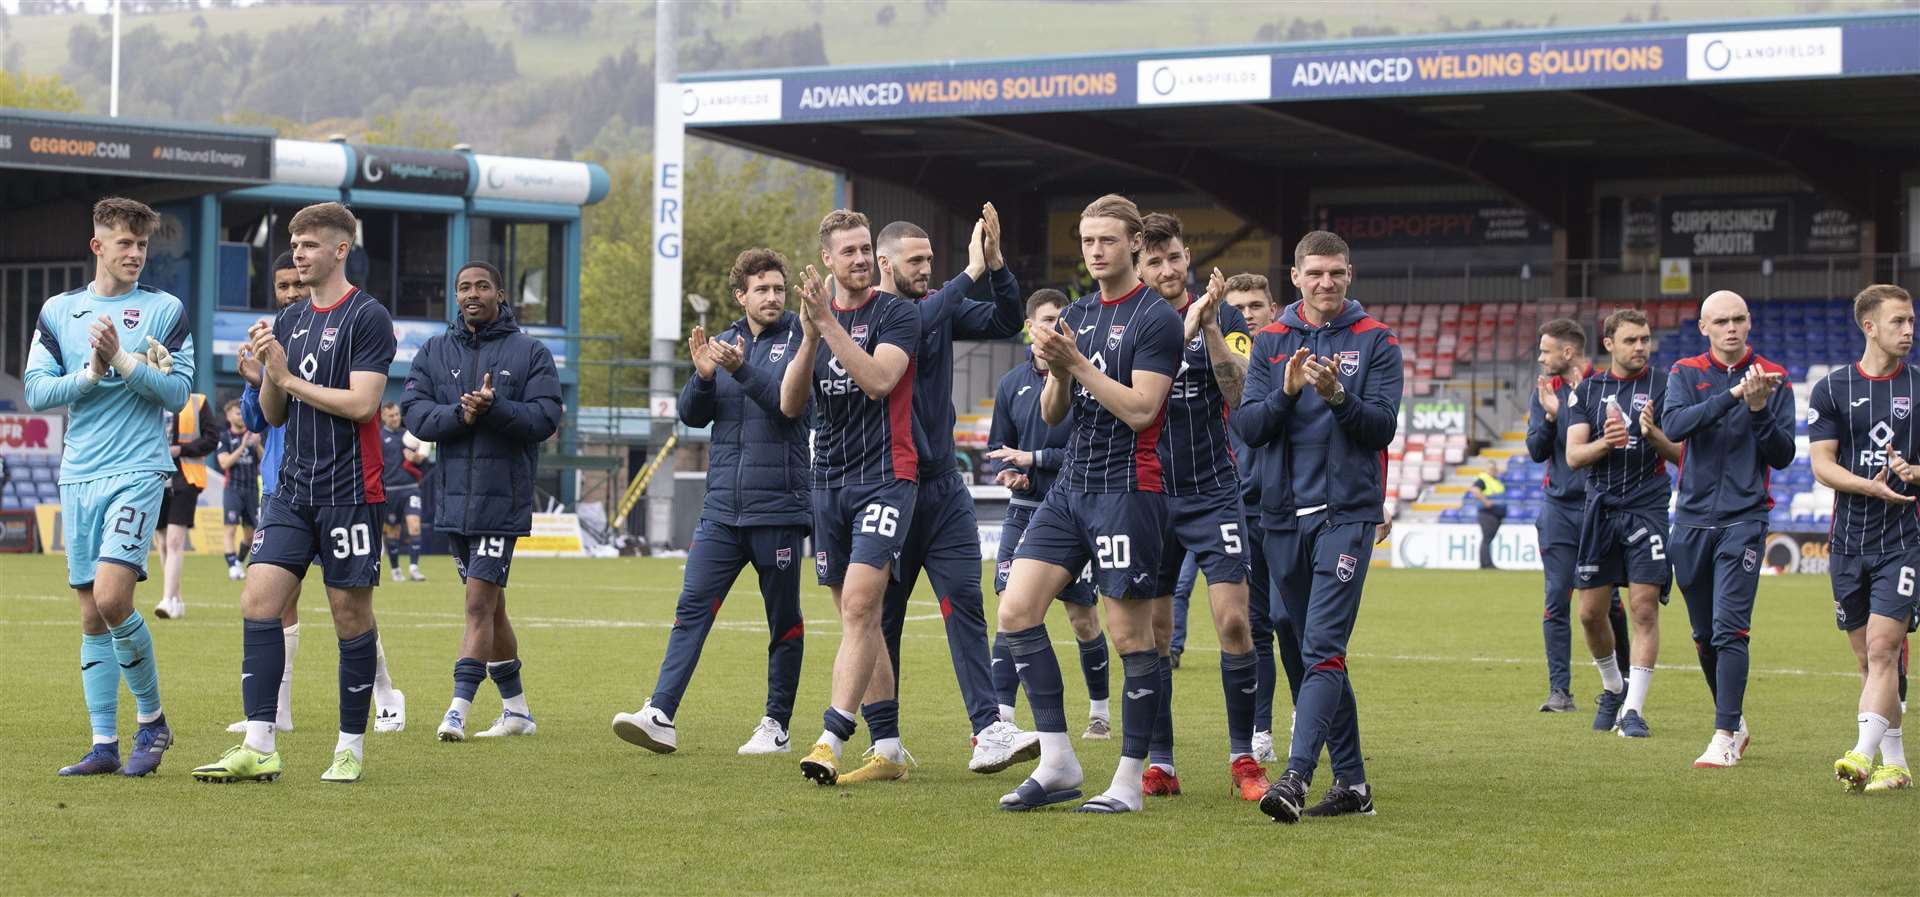 Picture - Ken Macpherson. Ross County(1) v Dundee Utd(2). 14/05/22. Ross County players applaud their fans at the end.